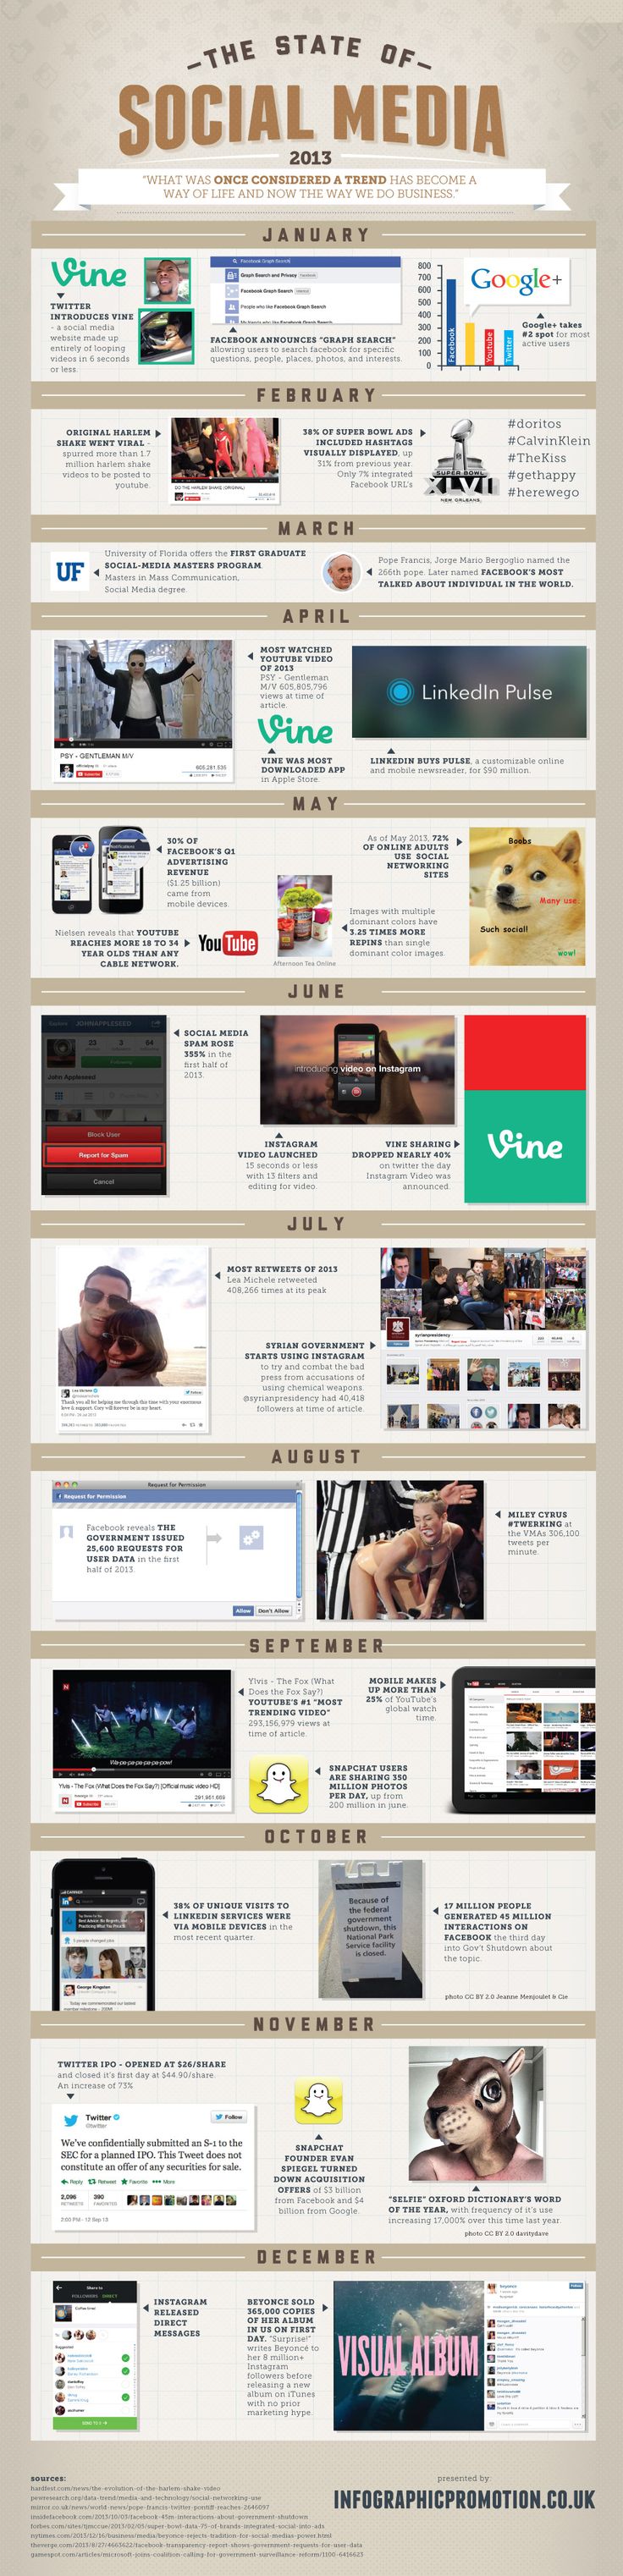 Advertising-Infographics-Twerking-what-the-fox-says-and-selfies-biggest-social-media-moments-of-2013-w Advertising Infographics : Twerking, what the fox says, and selfies: biggest social media moments of 2013 w...